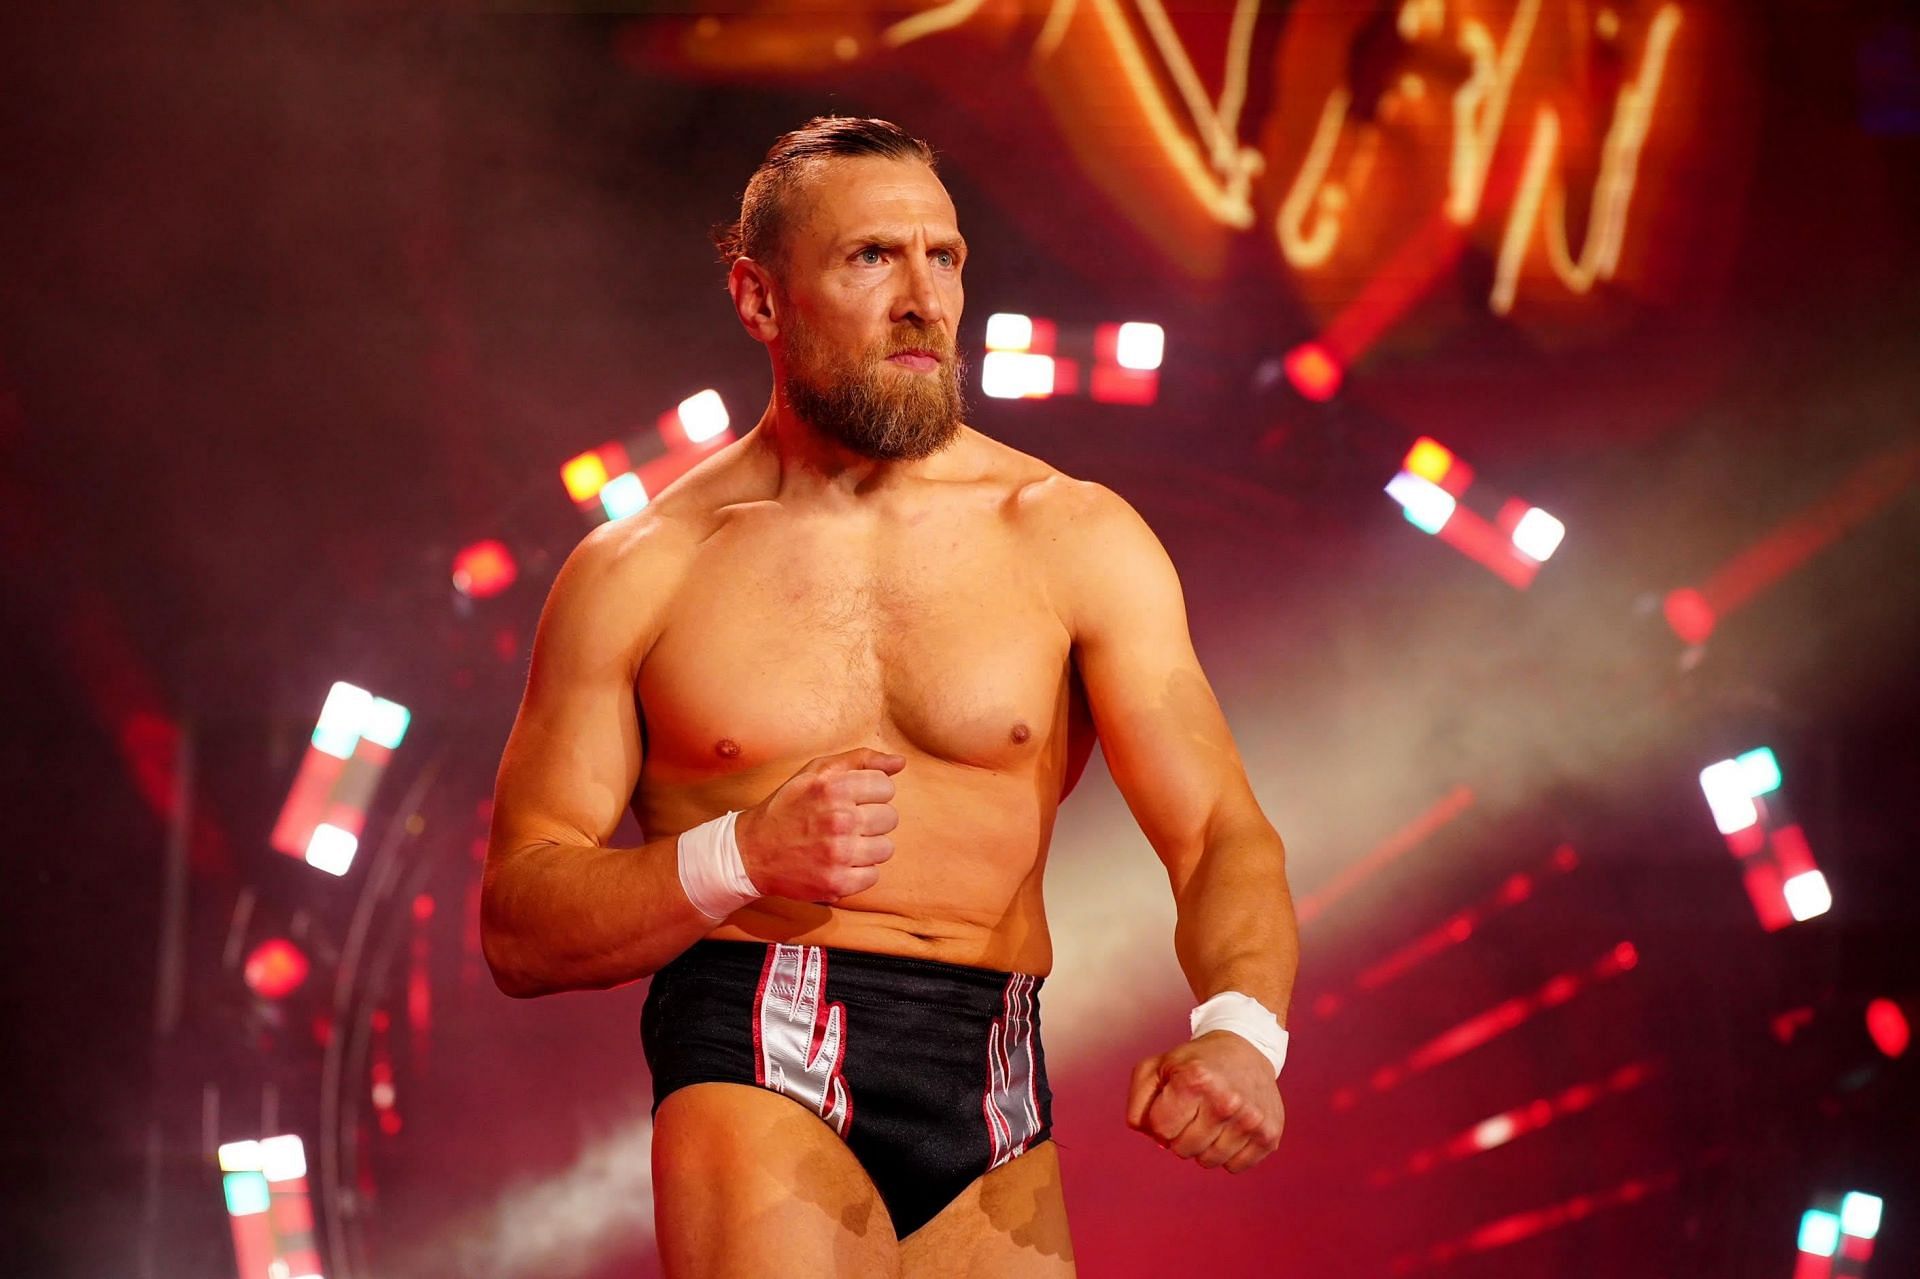 Bryan Danielson had a big role in getting William Regal to sign for AEW